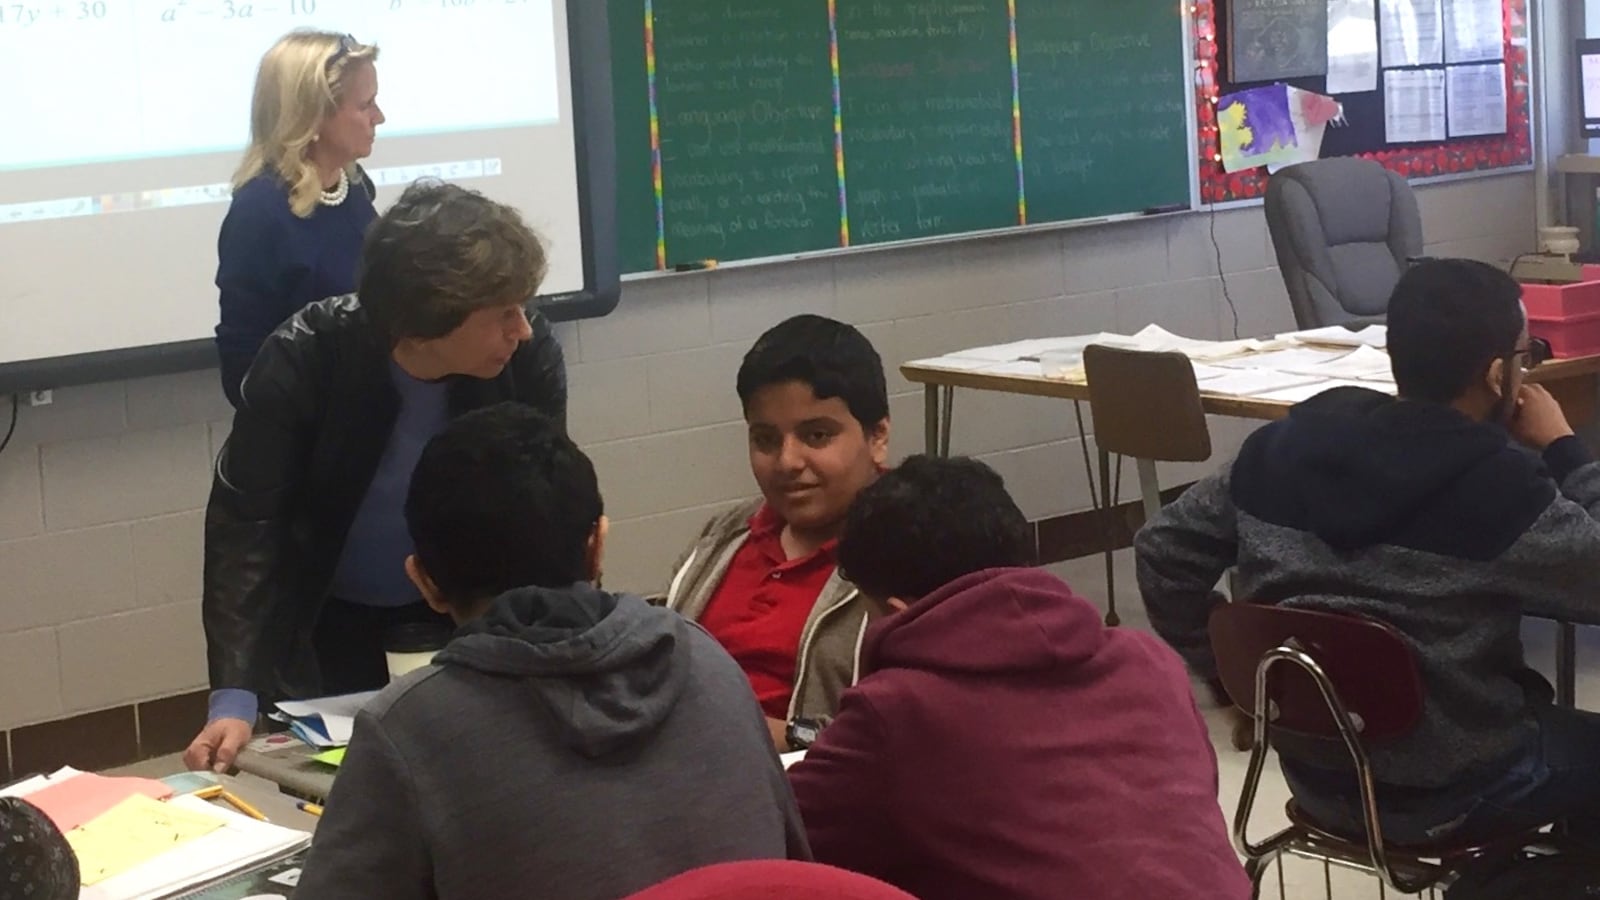 American Federation of Teachers President Randi Weingarten talks to students in a math class for English language learners at Edsel Ford High School in Dearborn, Michigan.